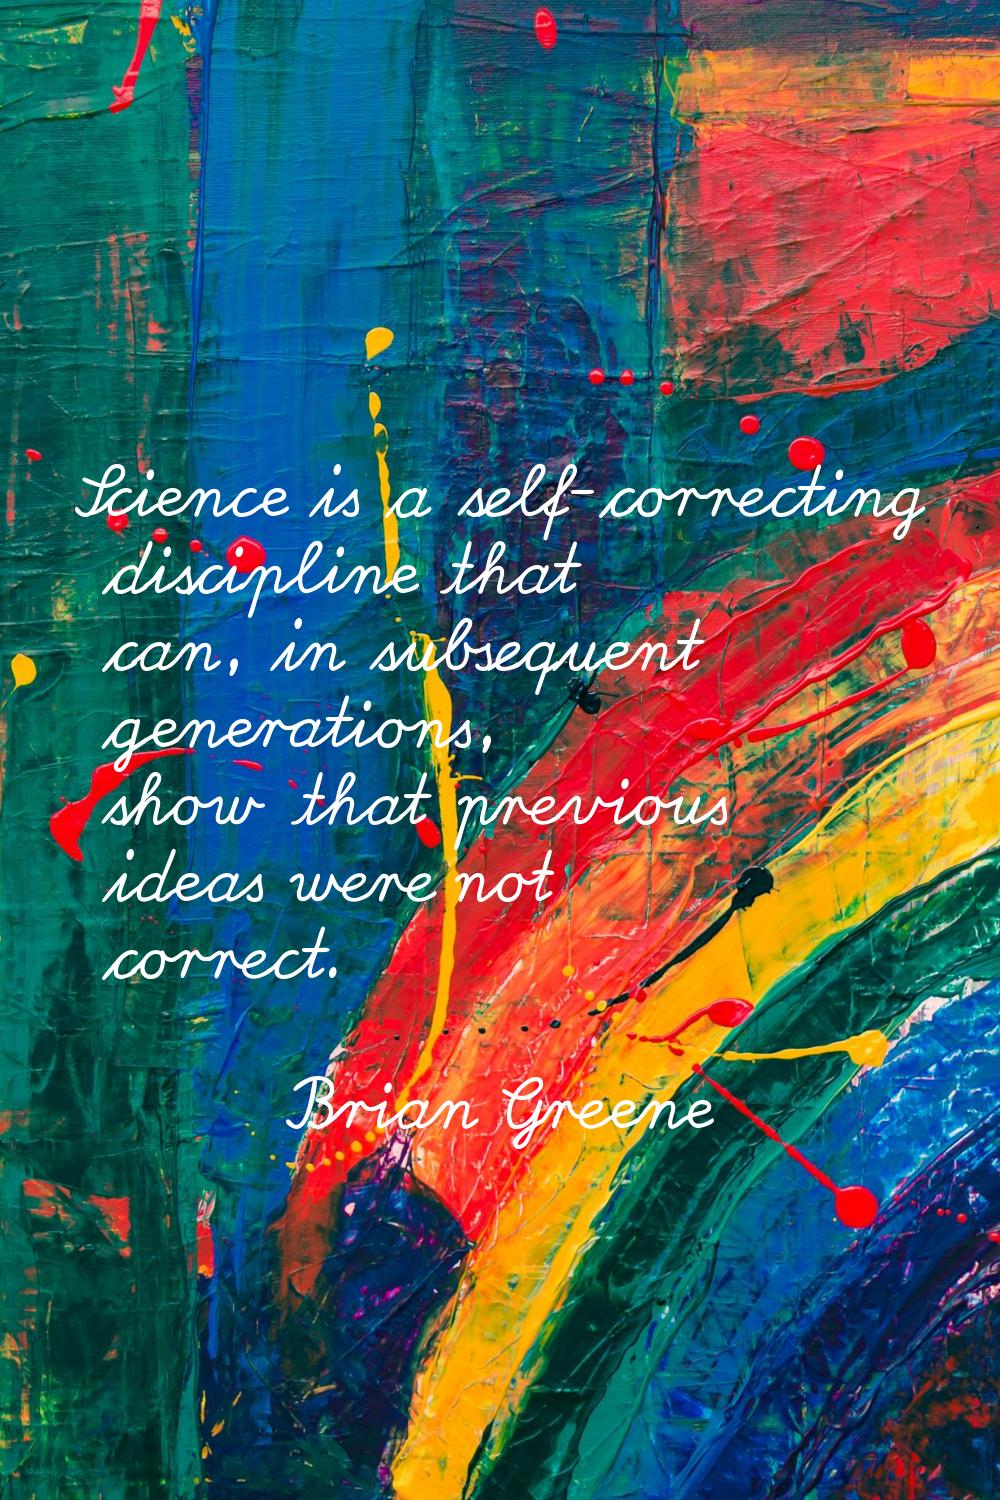 Science is a self-correcting discipline that can, in subsequent generations, show that previous ide